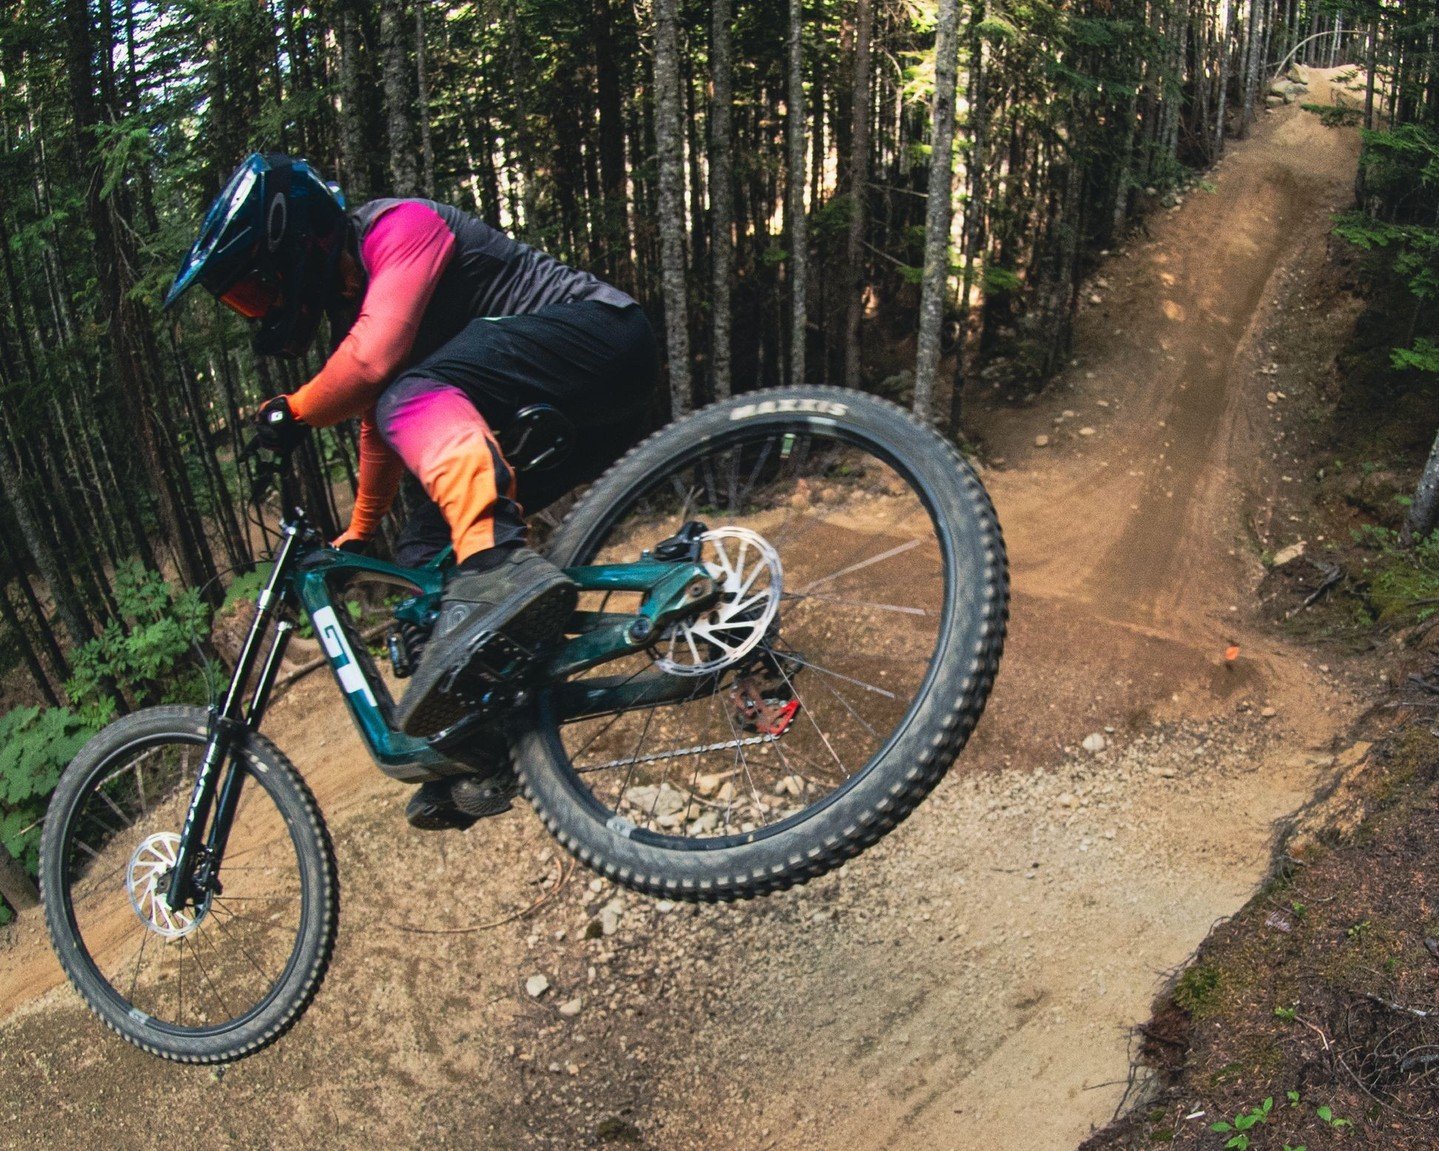 ONE WEEK TO GO until the @whistlerbikeprk opens 🤘⁠
⁠
Drop your bike off today and get it dialled in before opening next Friday. ⁠
⁠
📷 @bruhnsphoto